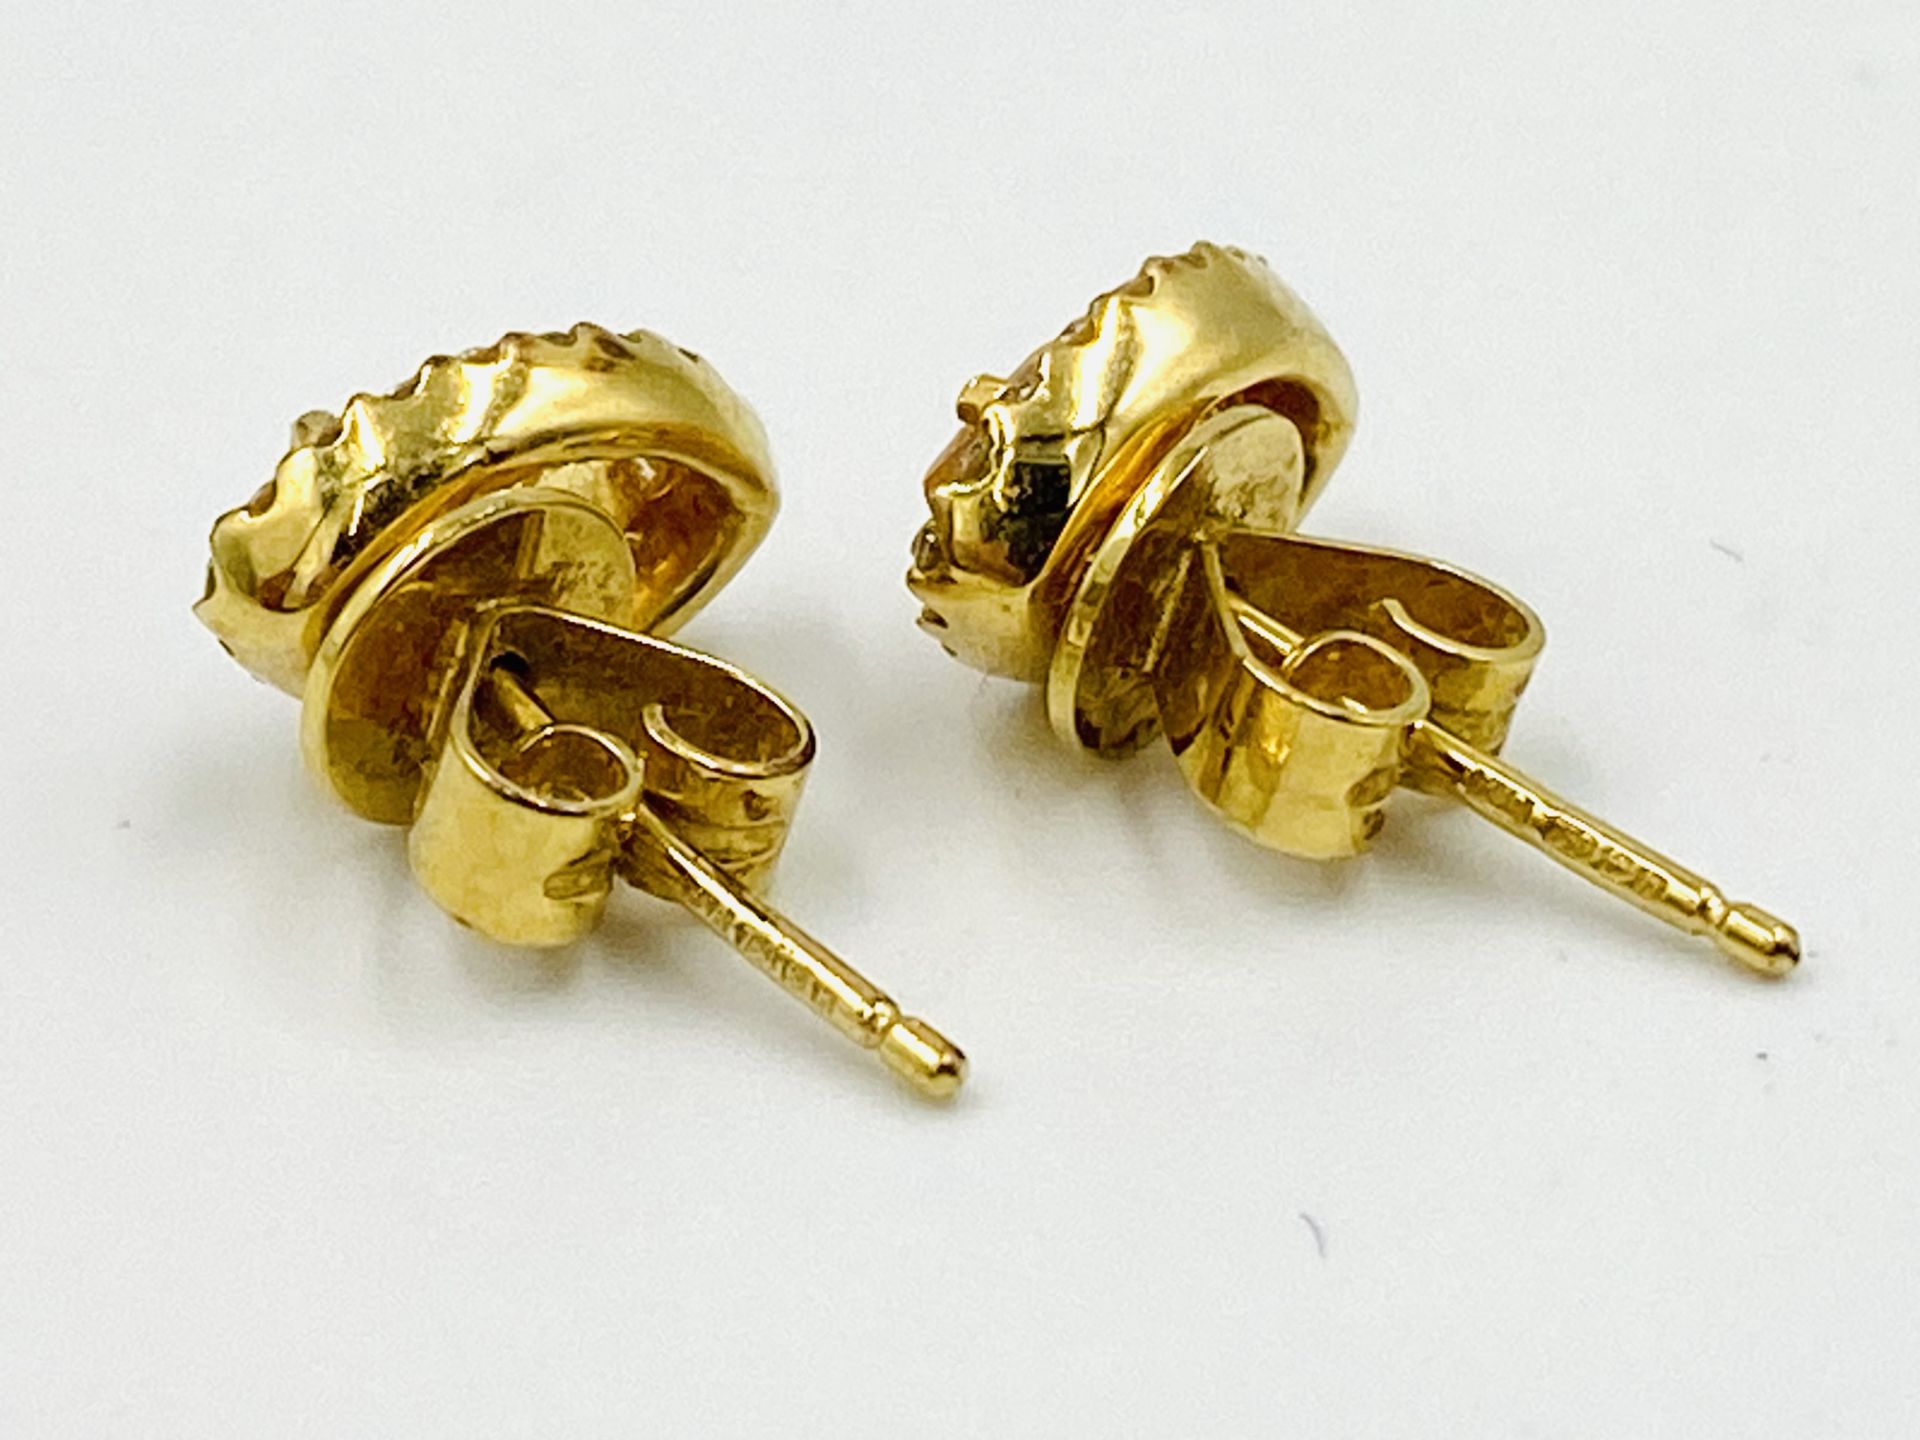 Pair of 18ct gold, citrine and diamond earrings - Image 3 of 4